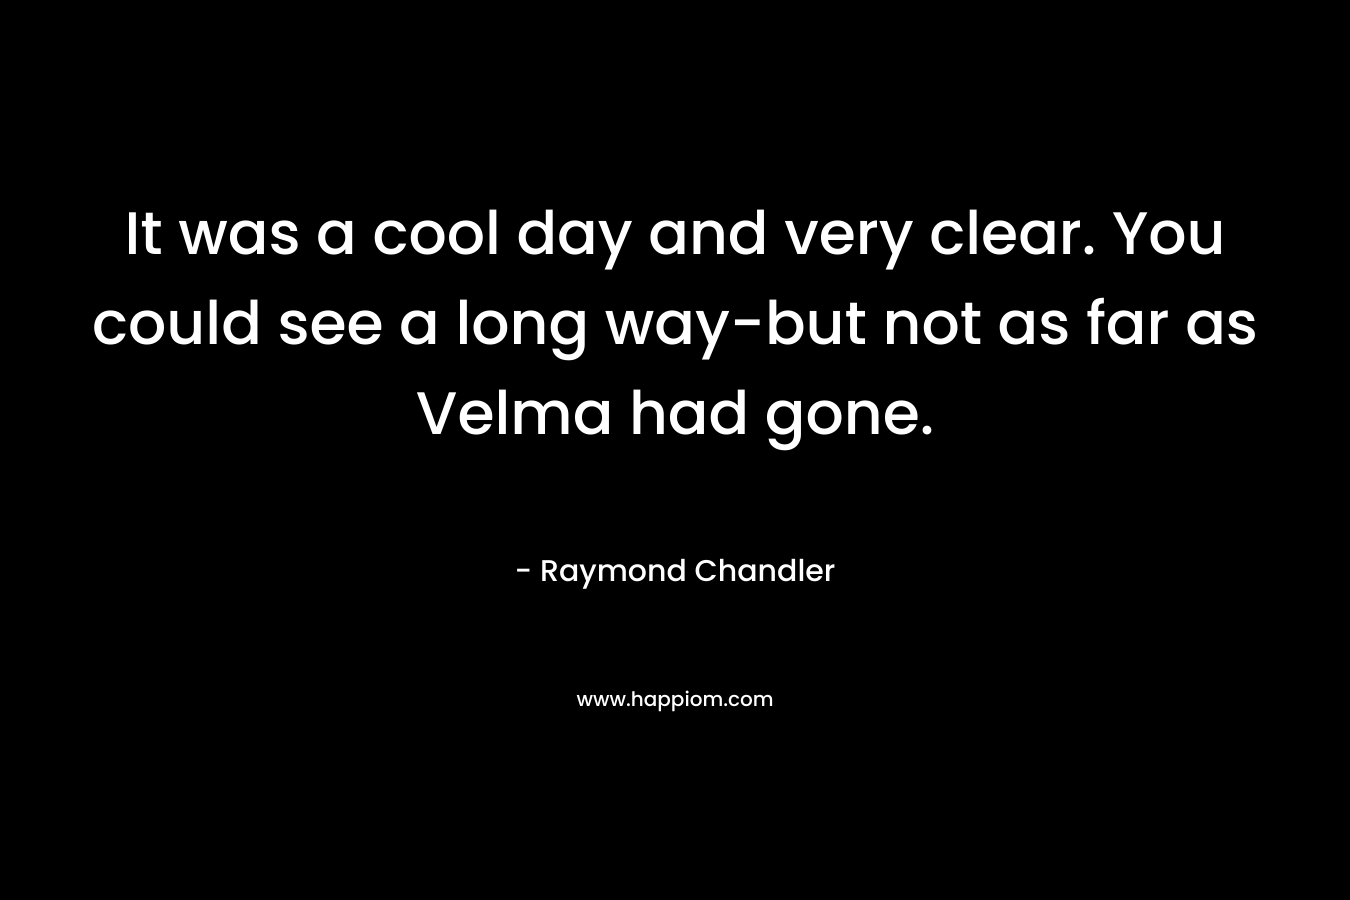 It was a cool day and very clear. You could see a long way-but not as far as Velma had gone. – Raymond Chandler